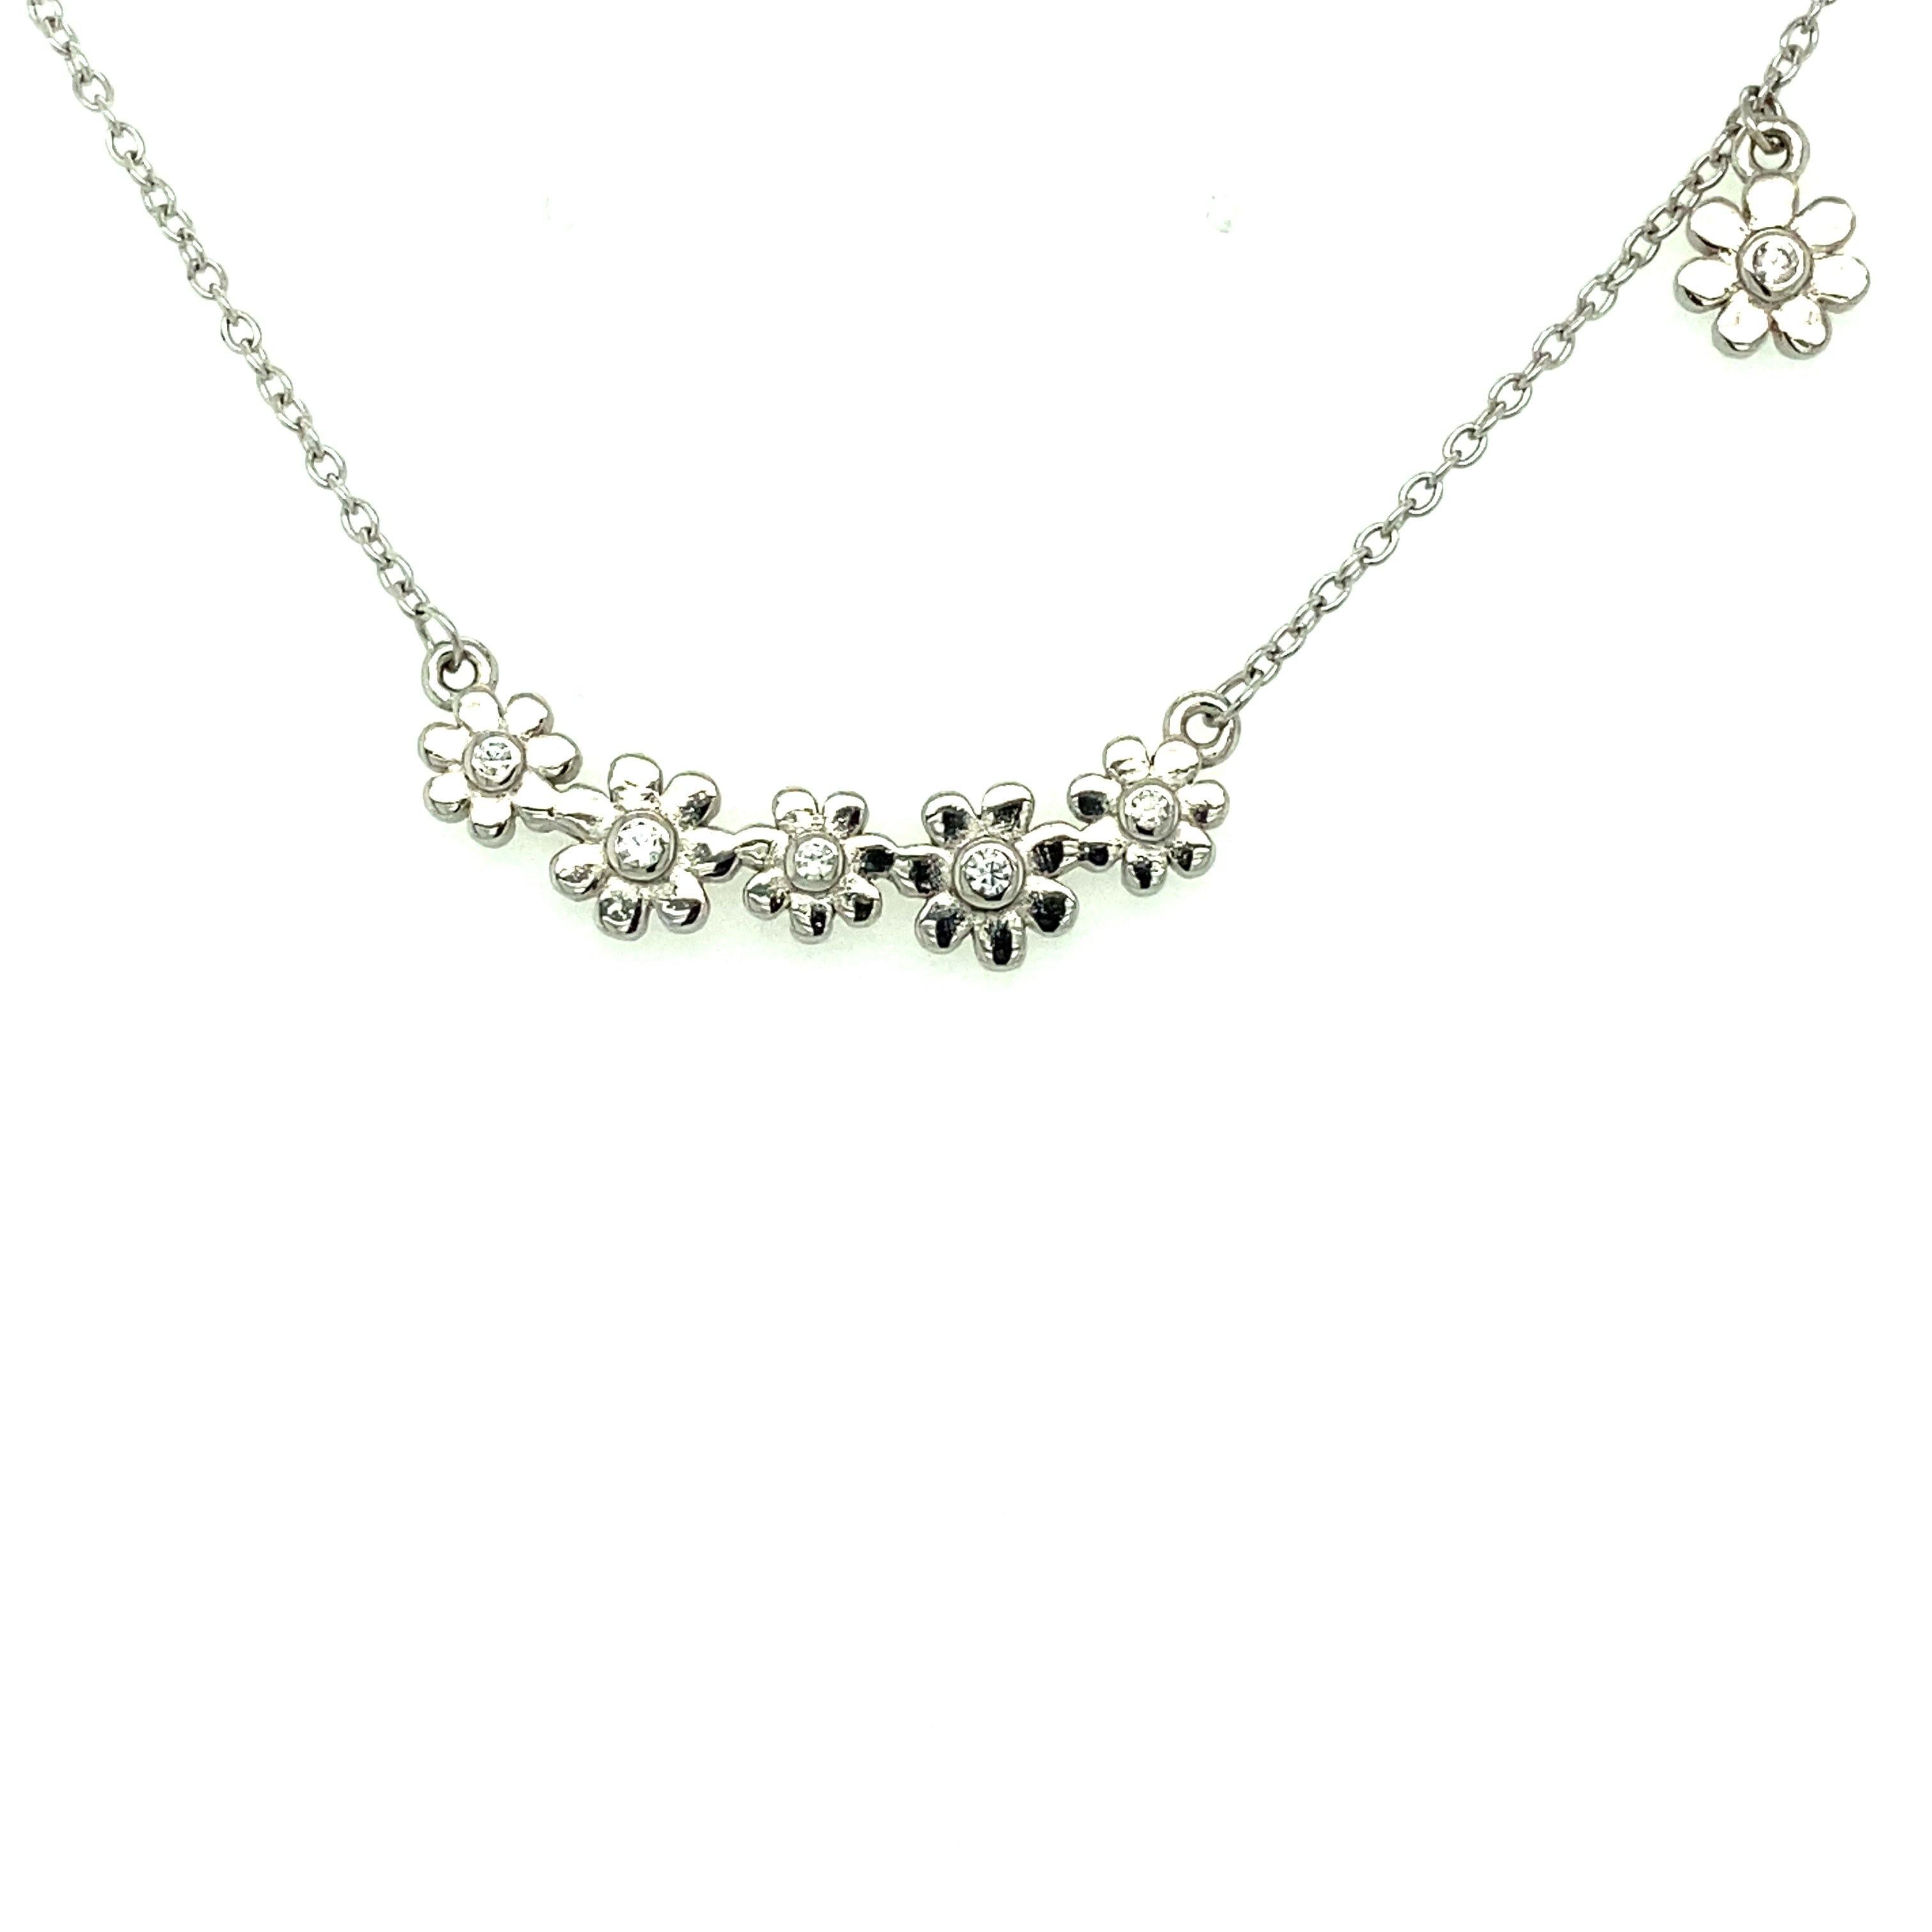 Asfour-Crystal-accessories-Necklace-n1631-925-Sterling-Silver